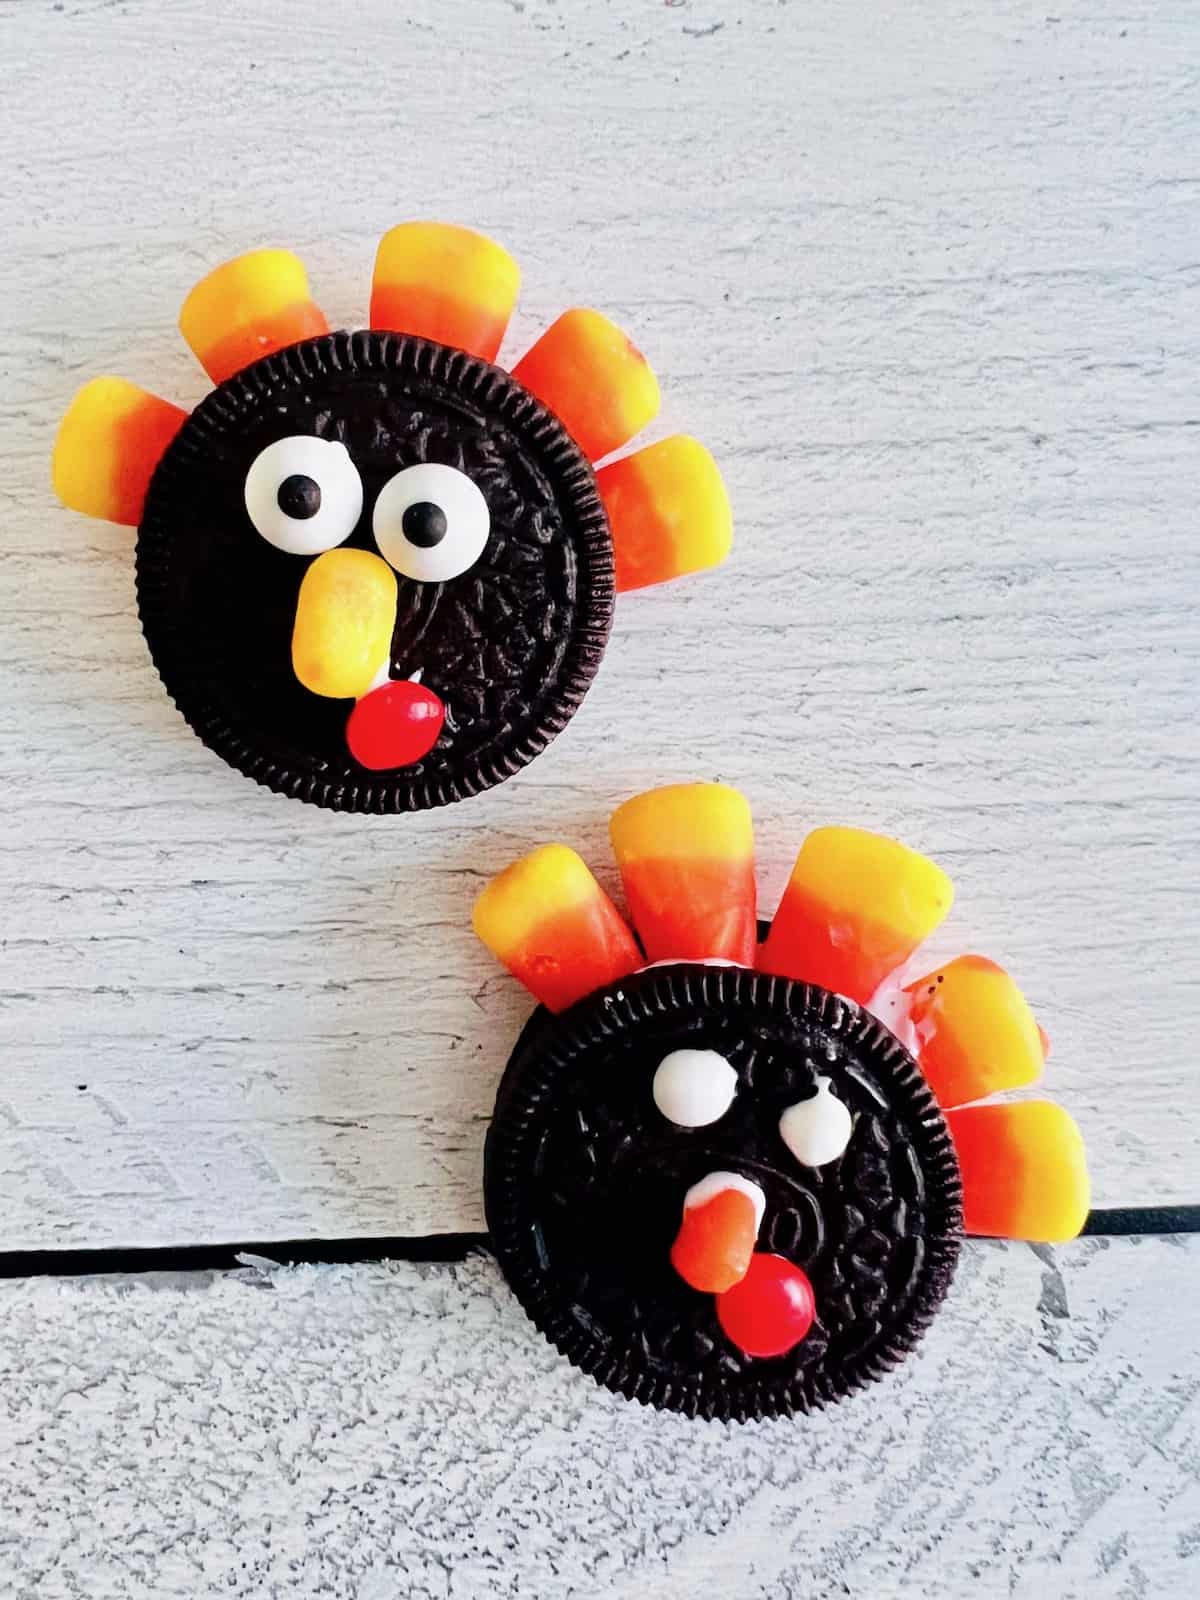 Two turkey faces on Oreo cookies with candy corn feathers between the cookie layers.